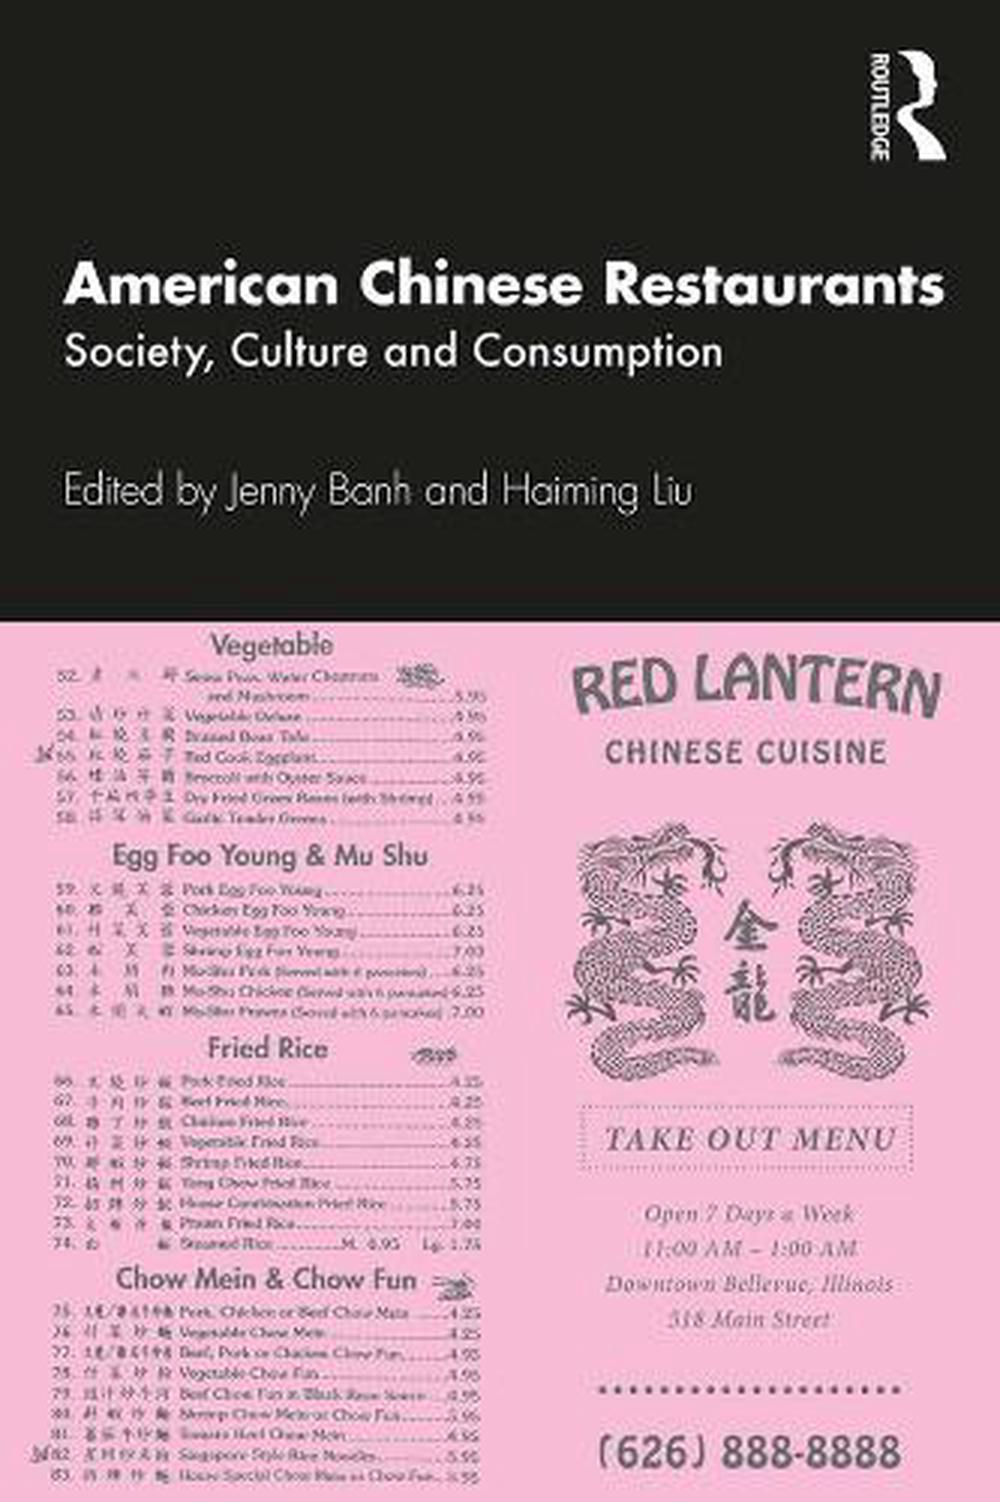 American Chinese Restaurants Society, Culture and Consumption (English